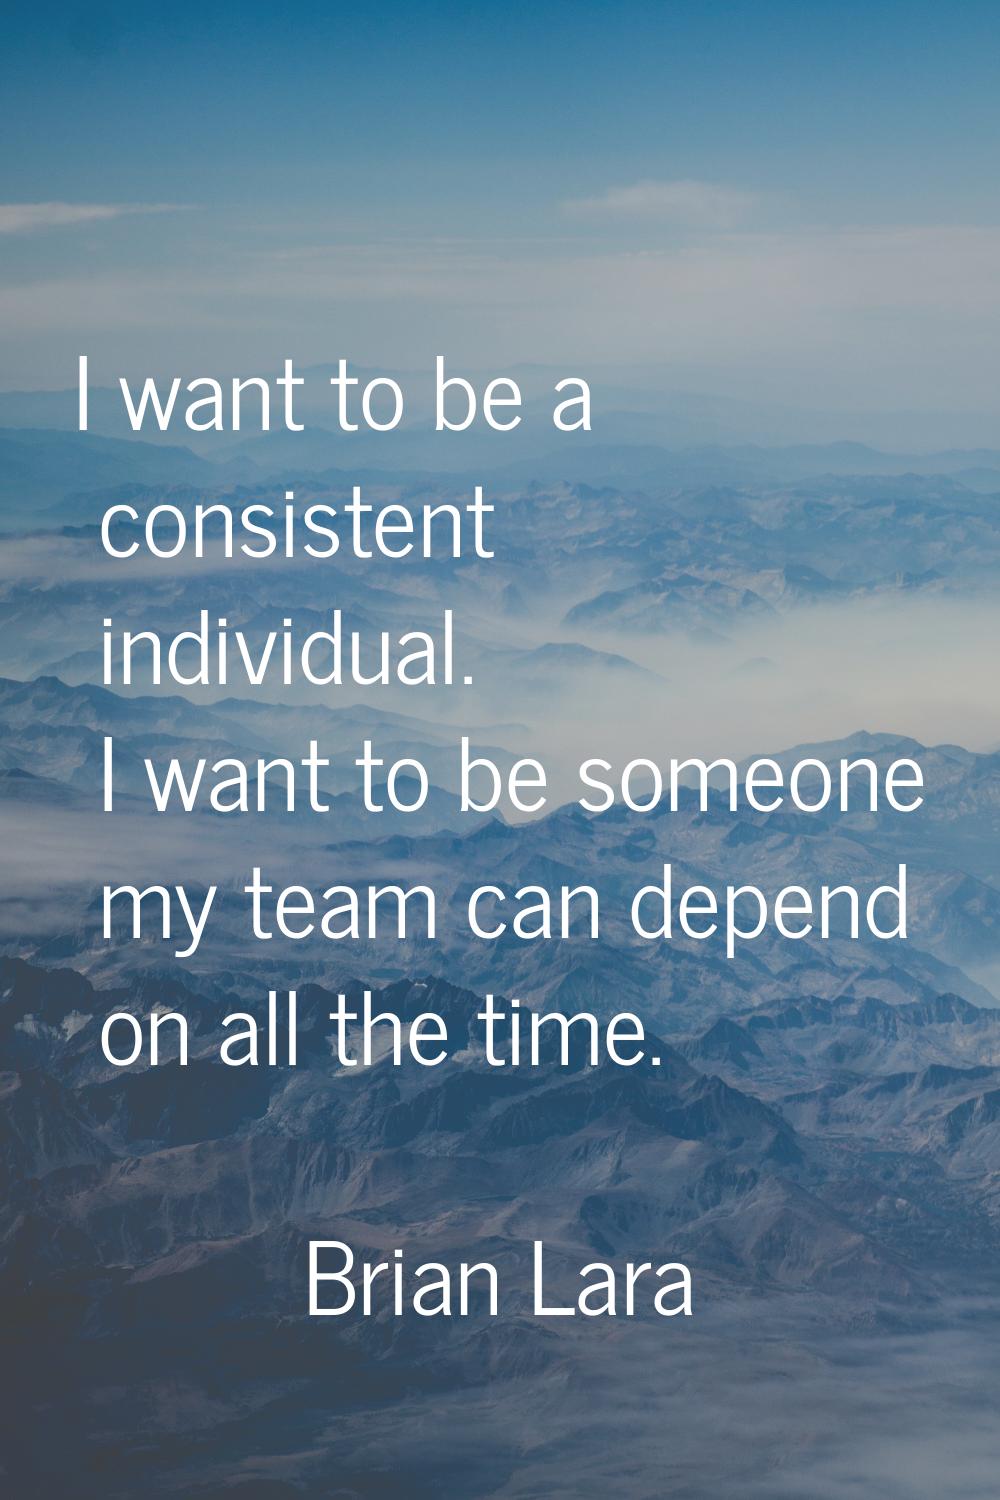 I want to be a consistent individual. I want to be someone my team can depend on all the time.